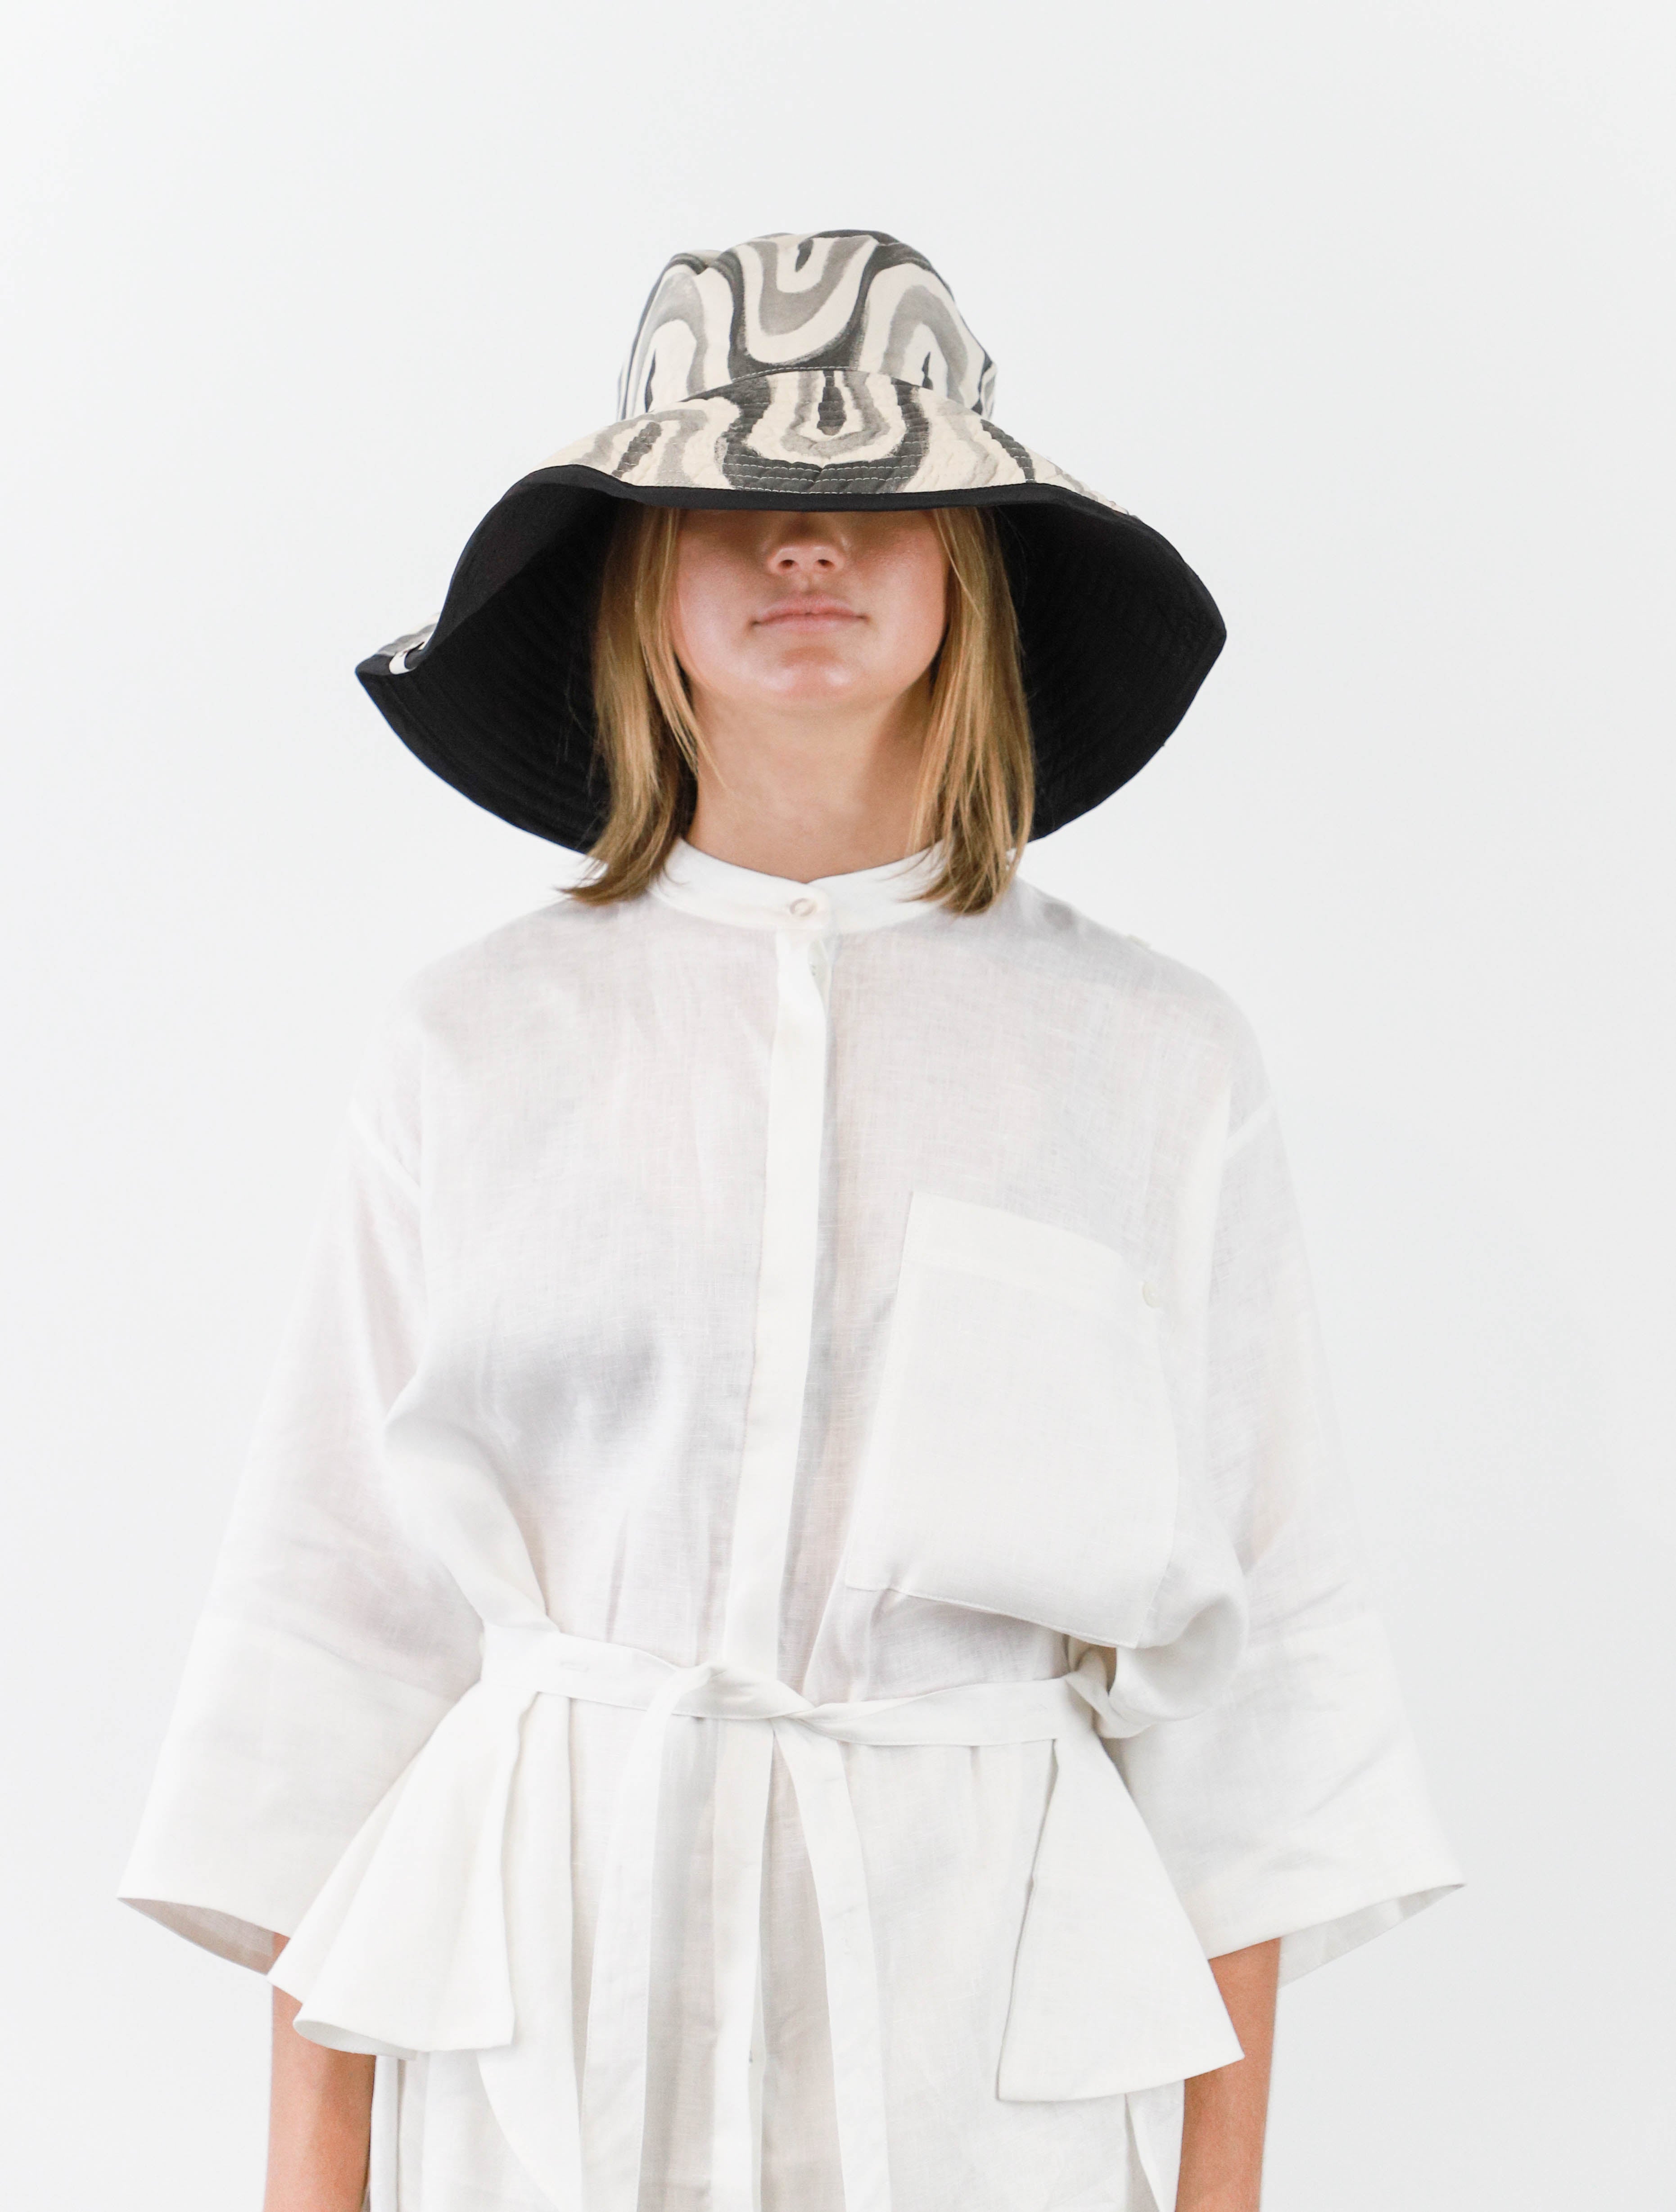 Romualda Roca bucket hat with black and white swirl pattern and black lining shown on model 